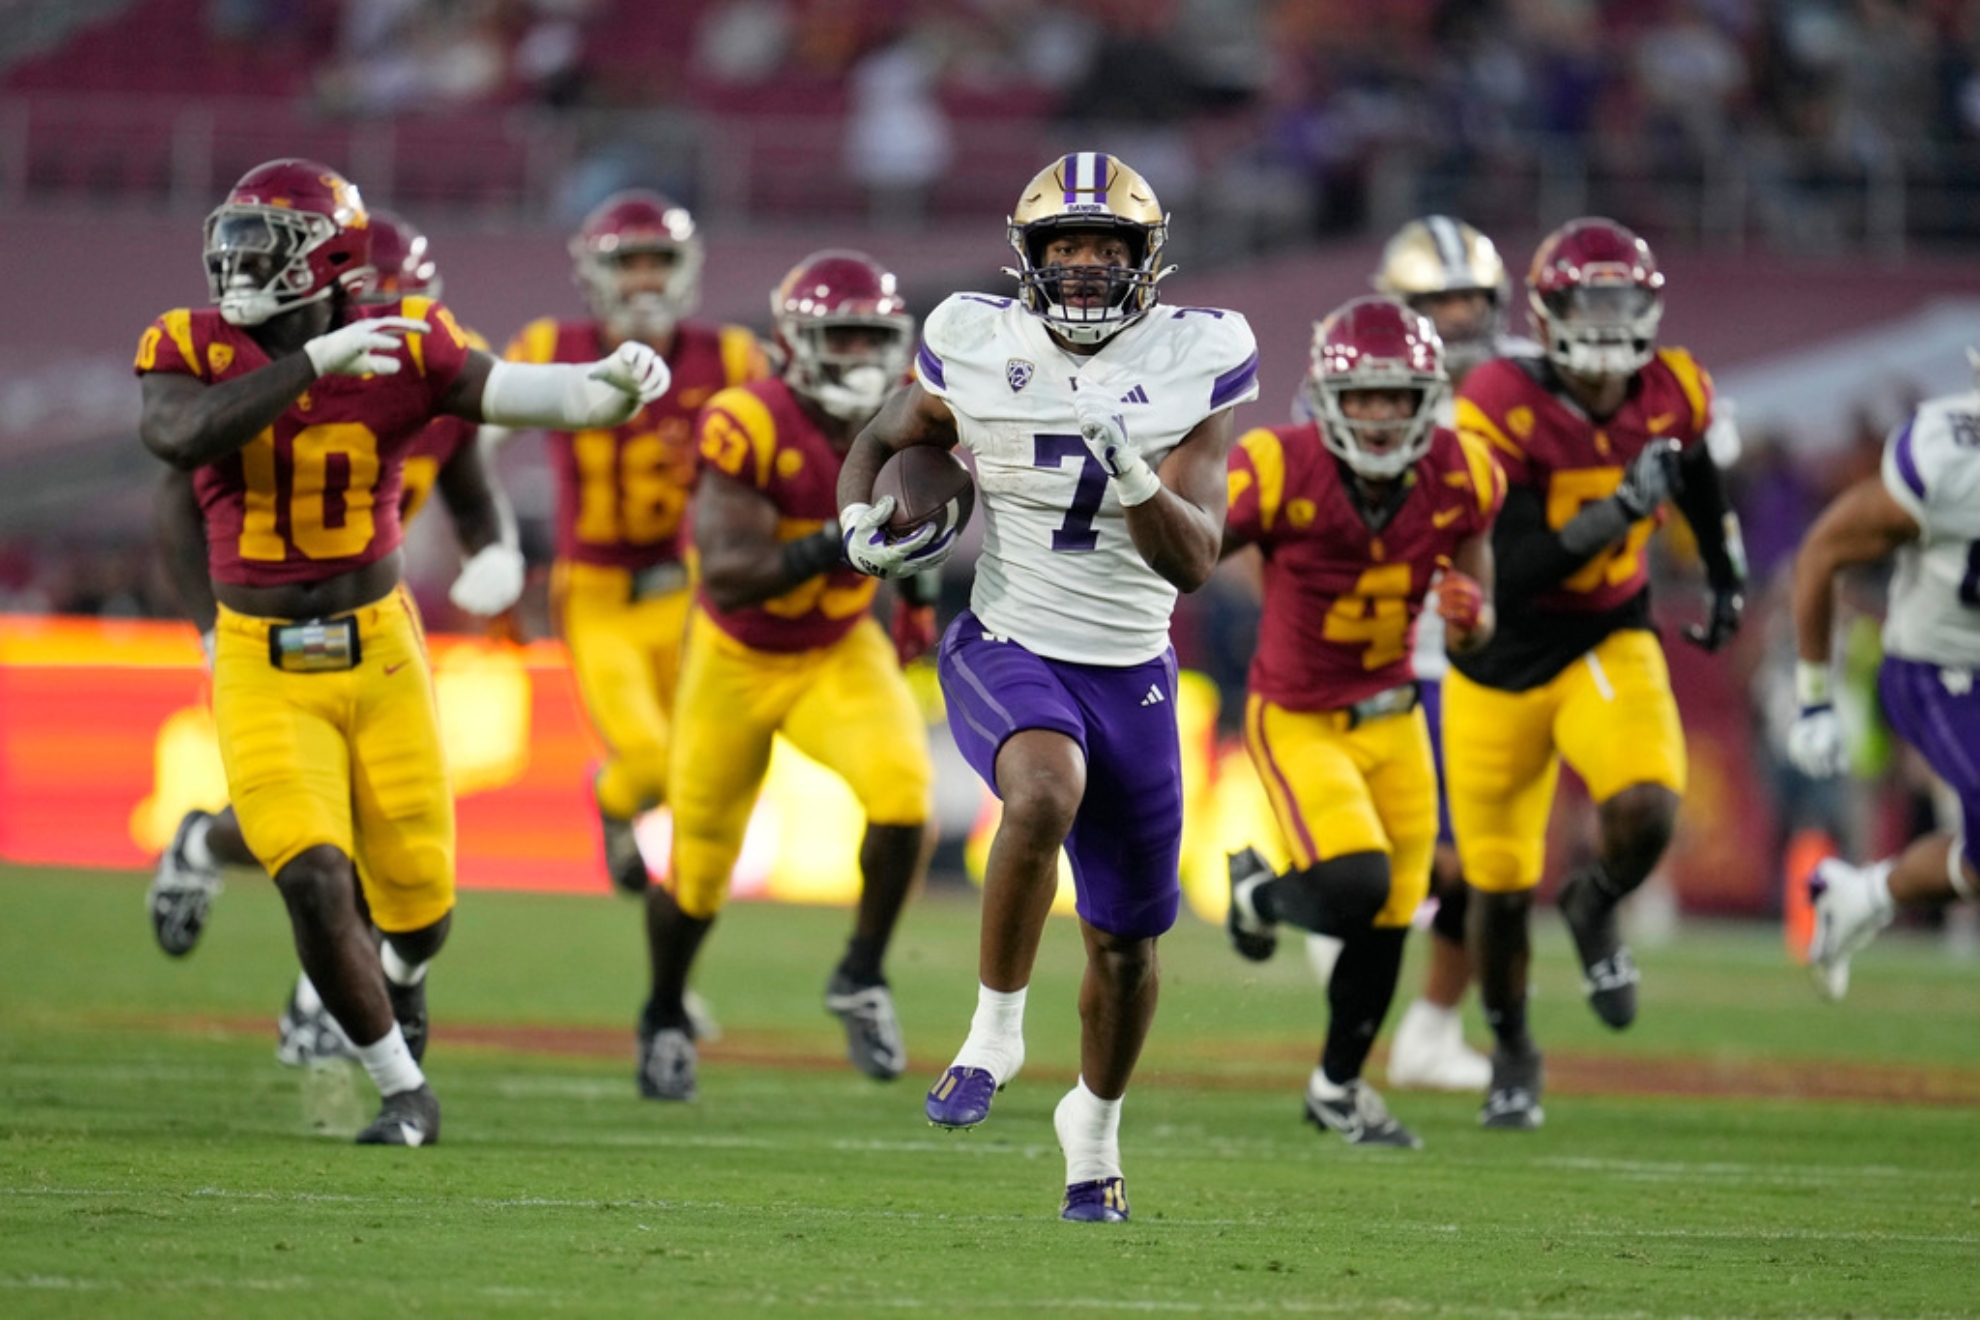 Washington running back Dillon Johnson (7) runs for a touchdown during the first half of an NCAA college football game against Southern California